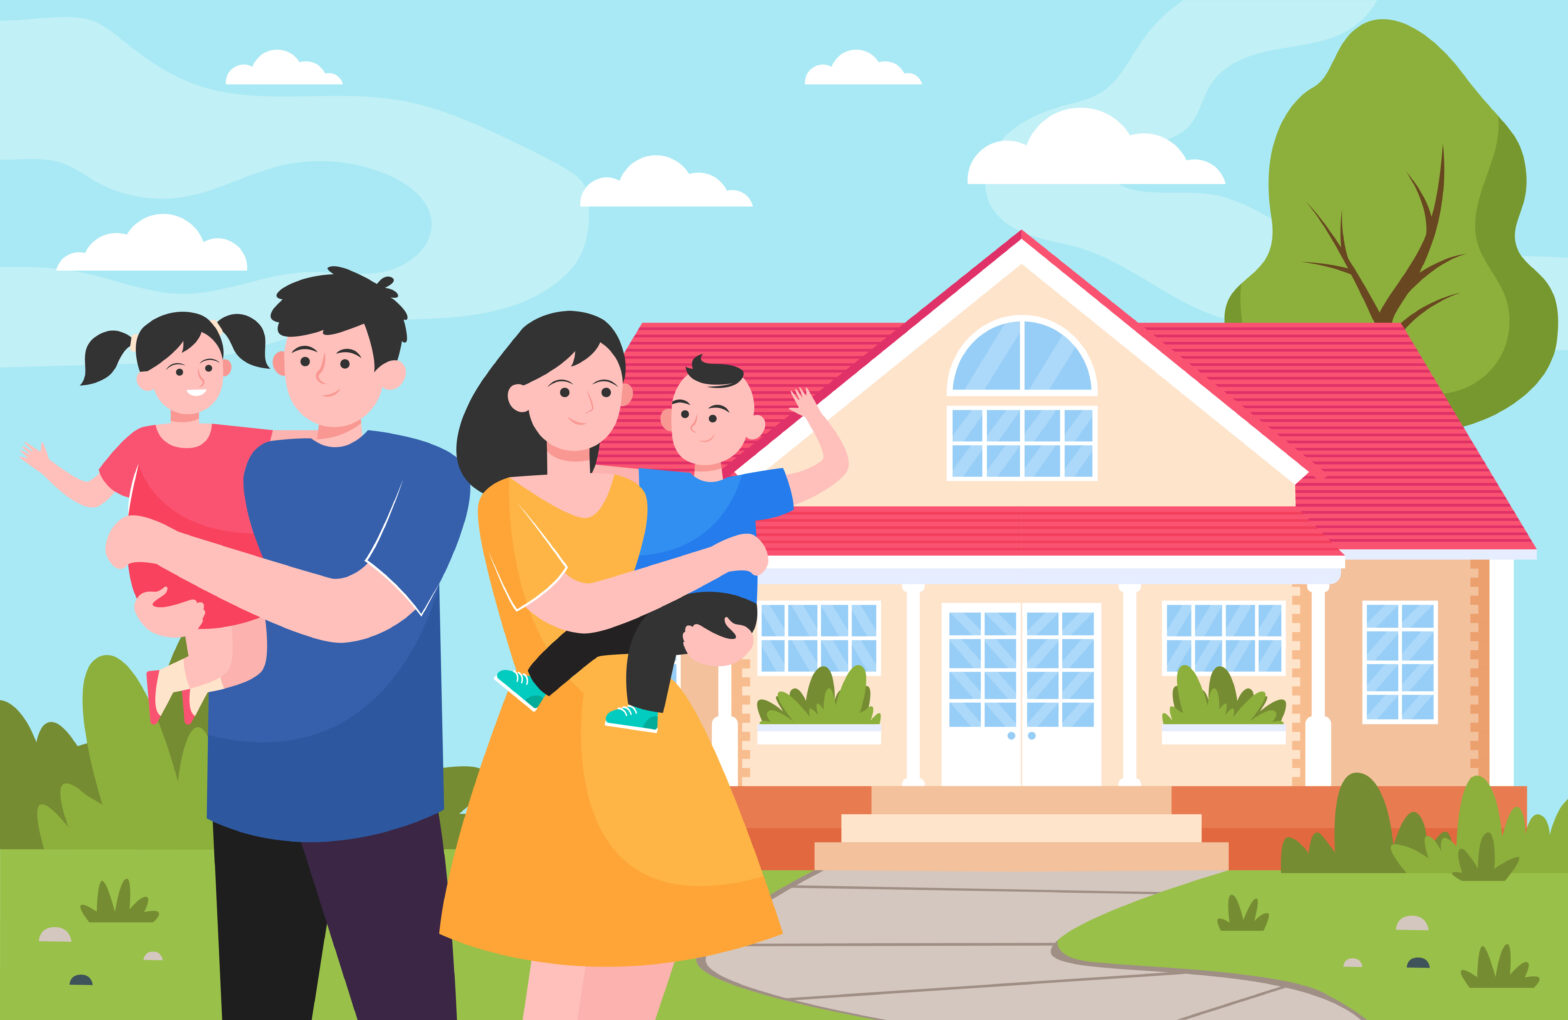 Happy young family standing in front of house flat vector illustration. Cartoon mother, father and kids being outside together. Togetherness, love, home and happiness concept